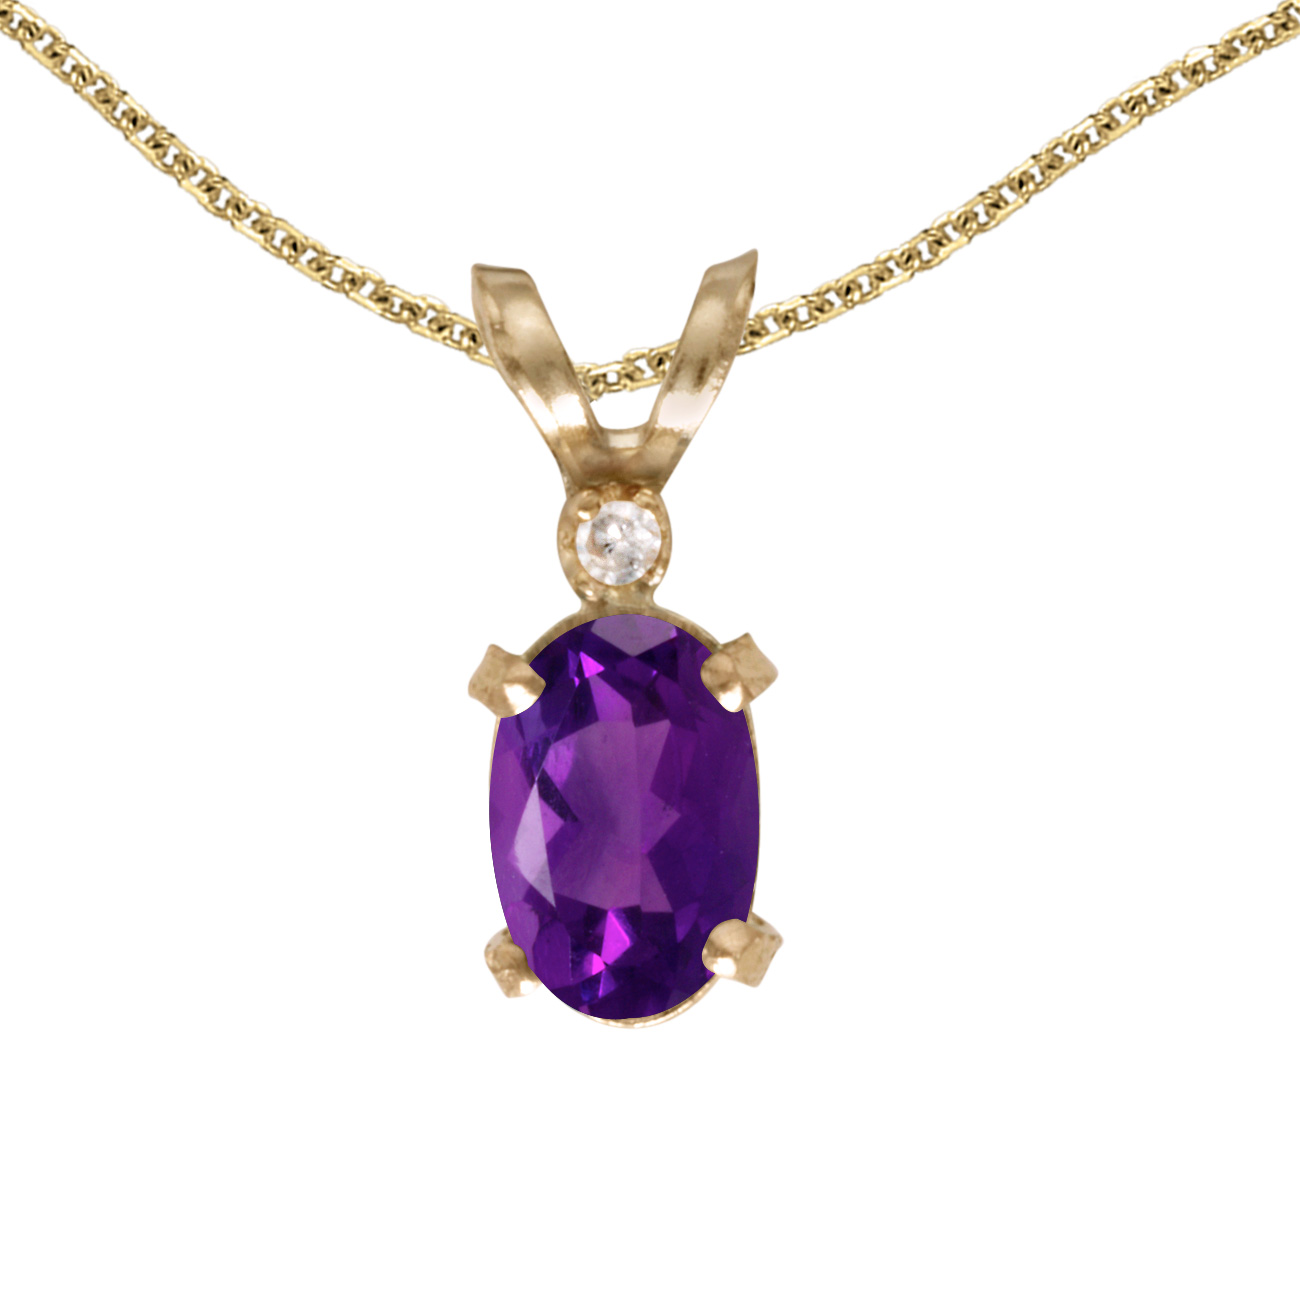 DIRECT-JEWELRY DON'T FORGET THE DASH 14k Yellow Gold Oval Amethyst And Diamond Filagree Pendant with 18" Chain